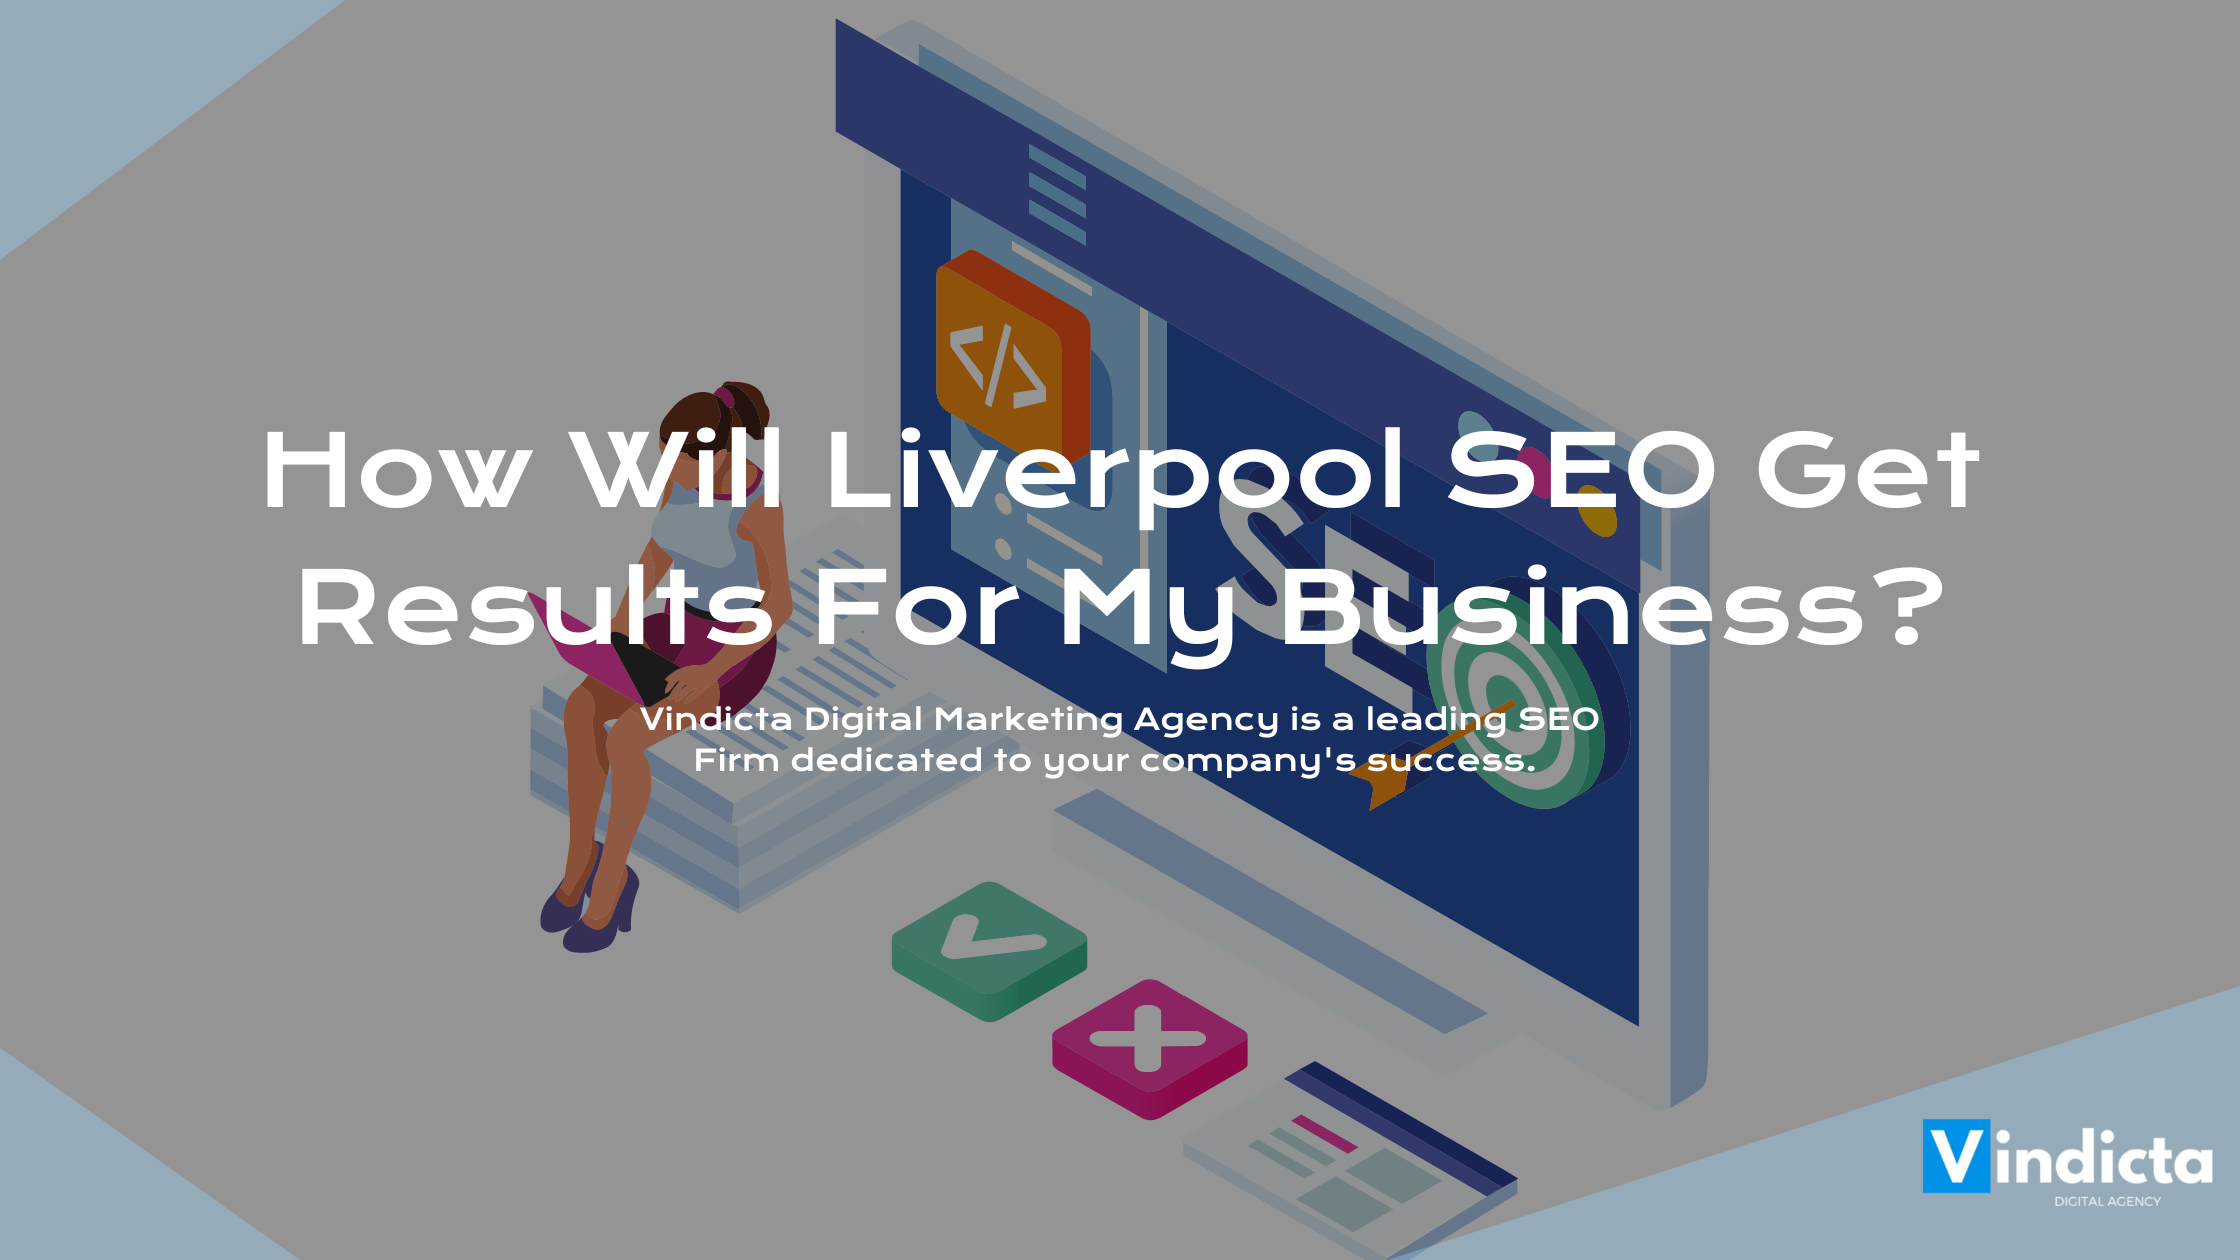 How Will Liverpool SEO Get Results For My Business?